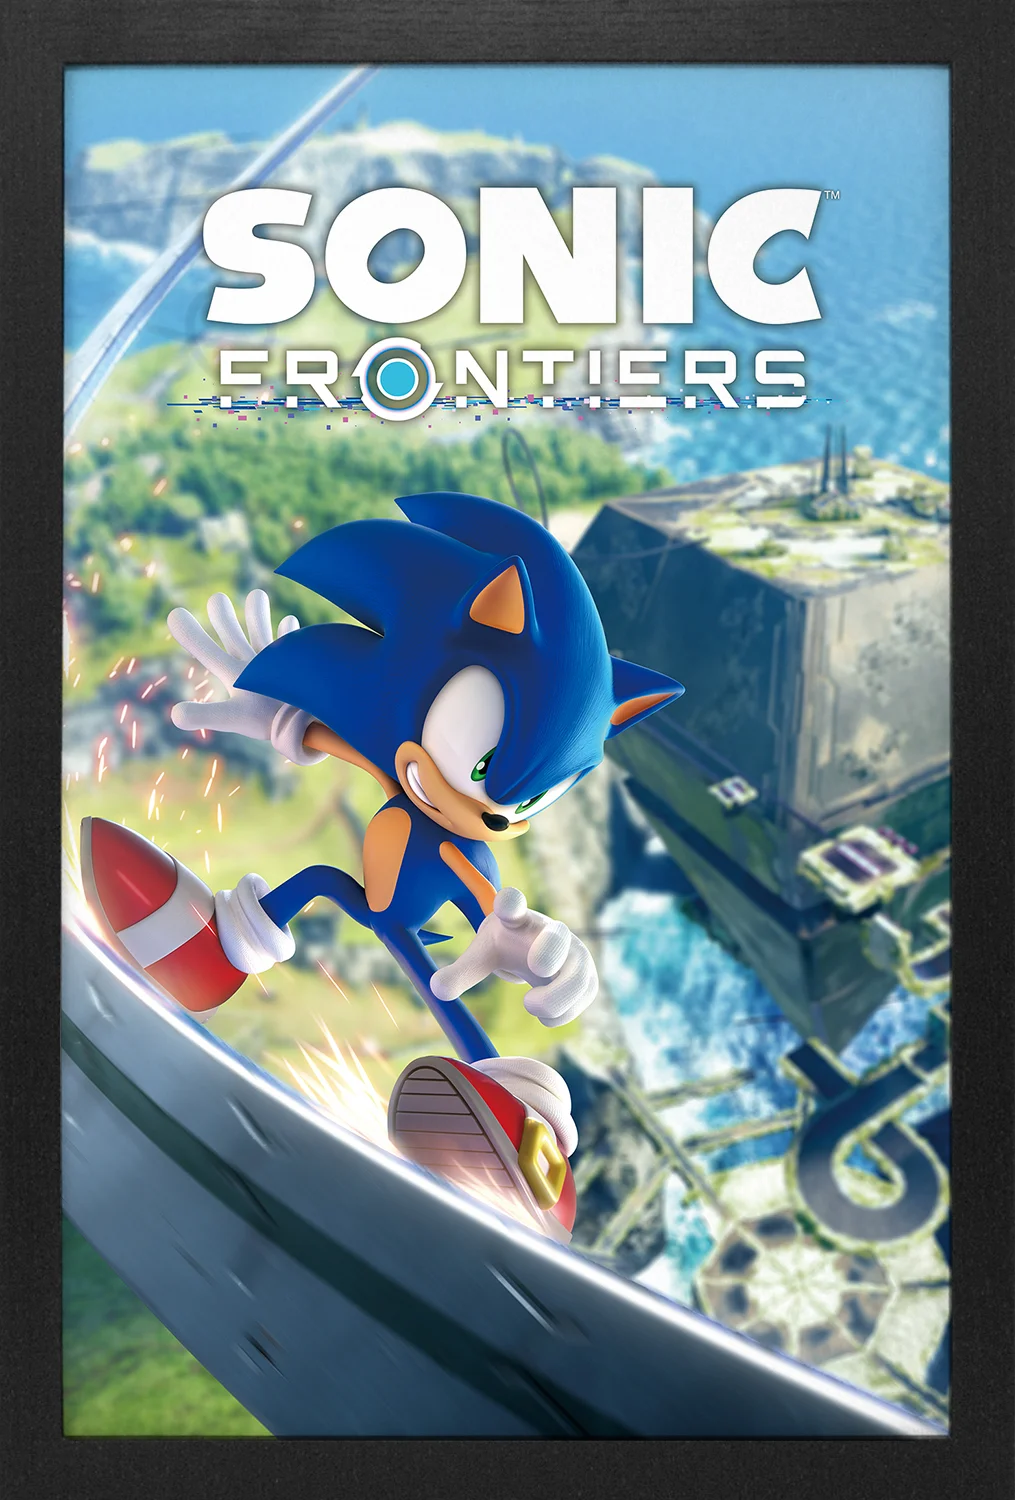 Sonic the Hedgehog - Sonic Frontiers (11"x17" Gel-Coat) (Order in multiples of 6, mix and match styles)